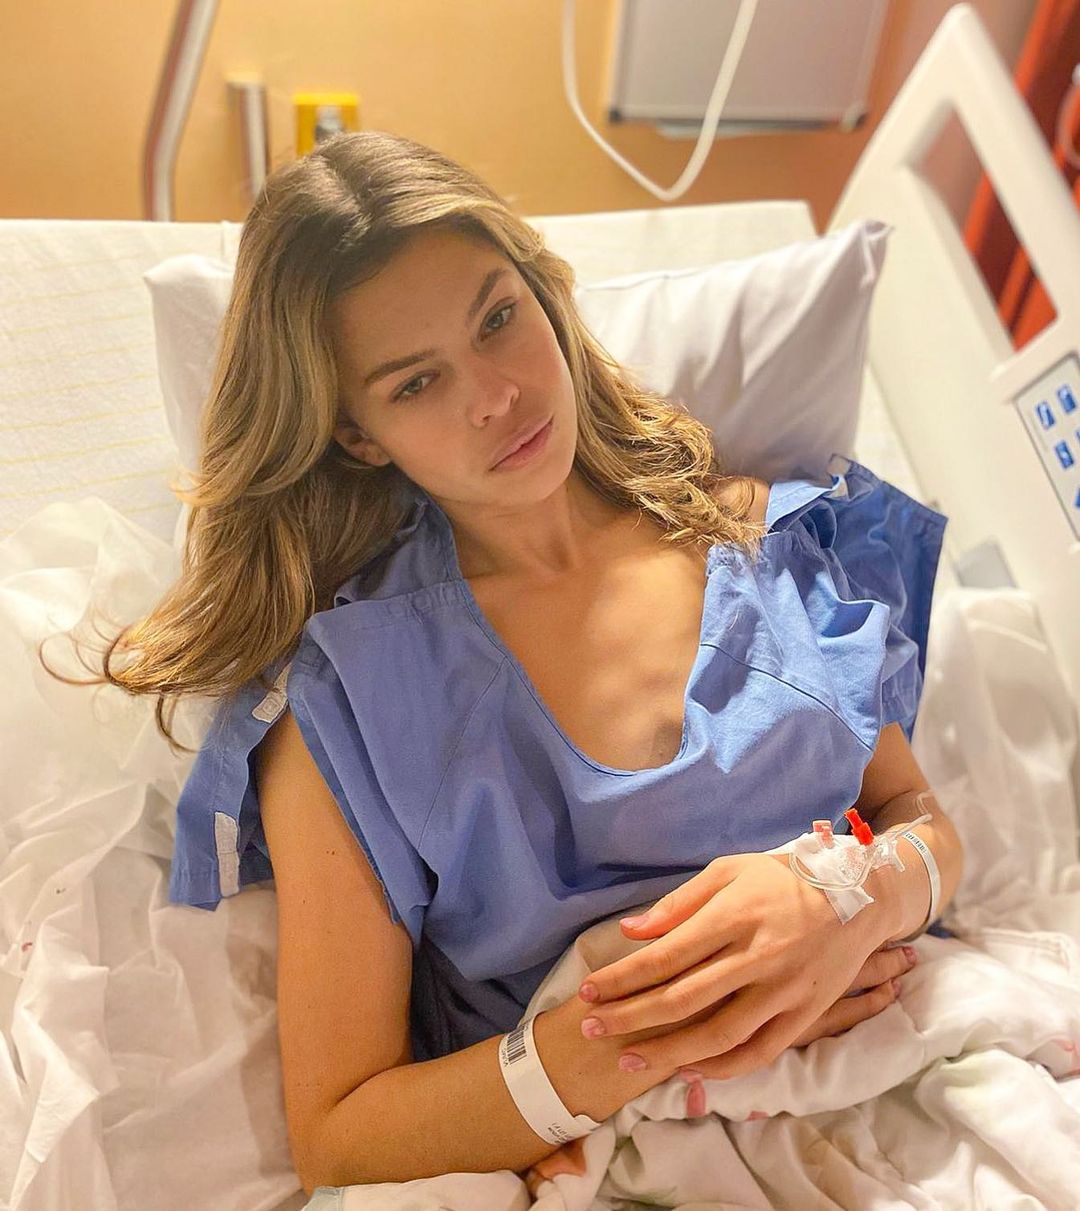 Dutch model and Miss Netherlands, Rikkie Kollé, lays in a hospital bed after transitioning